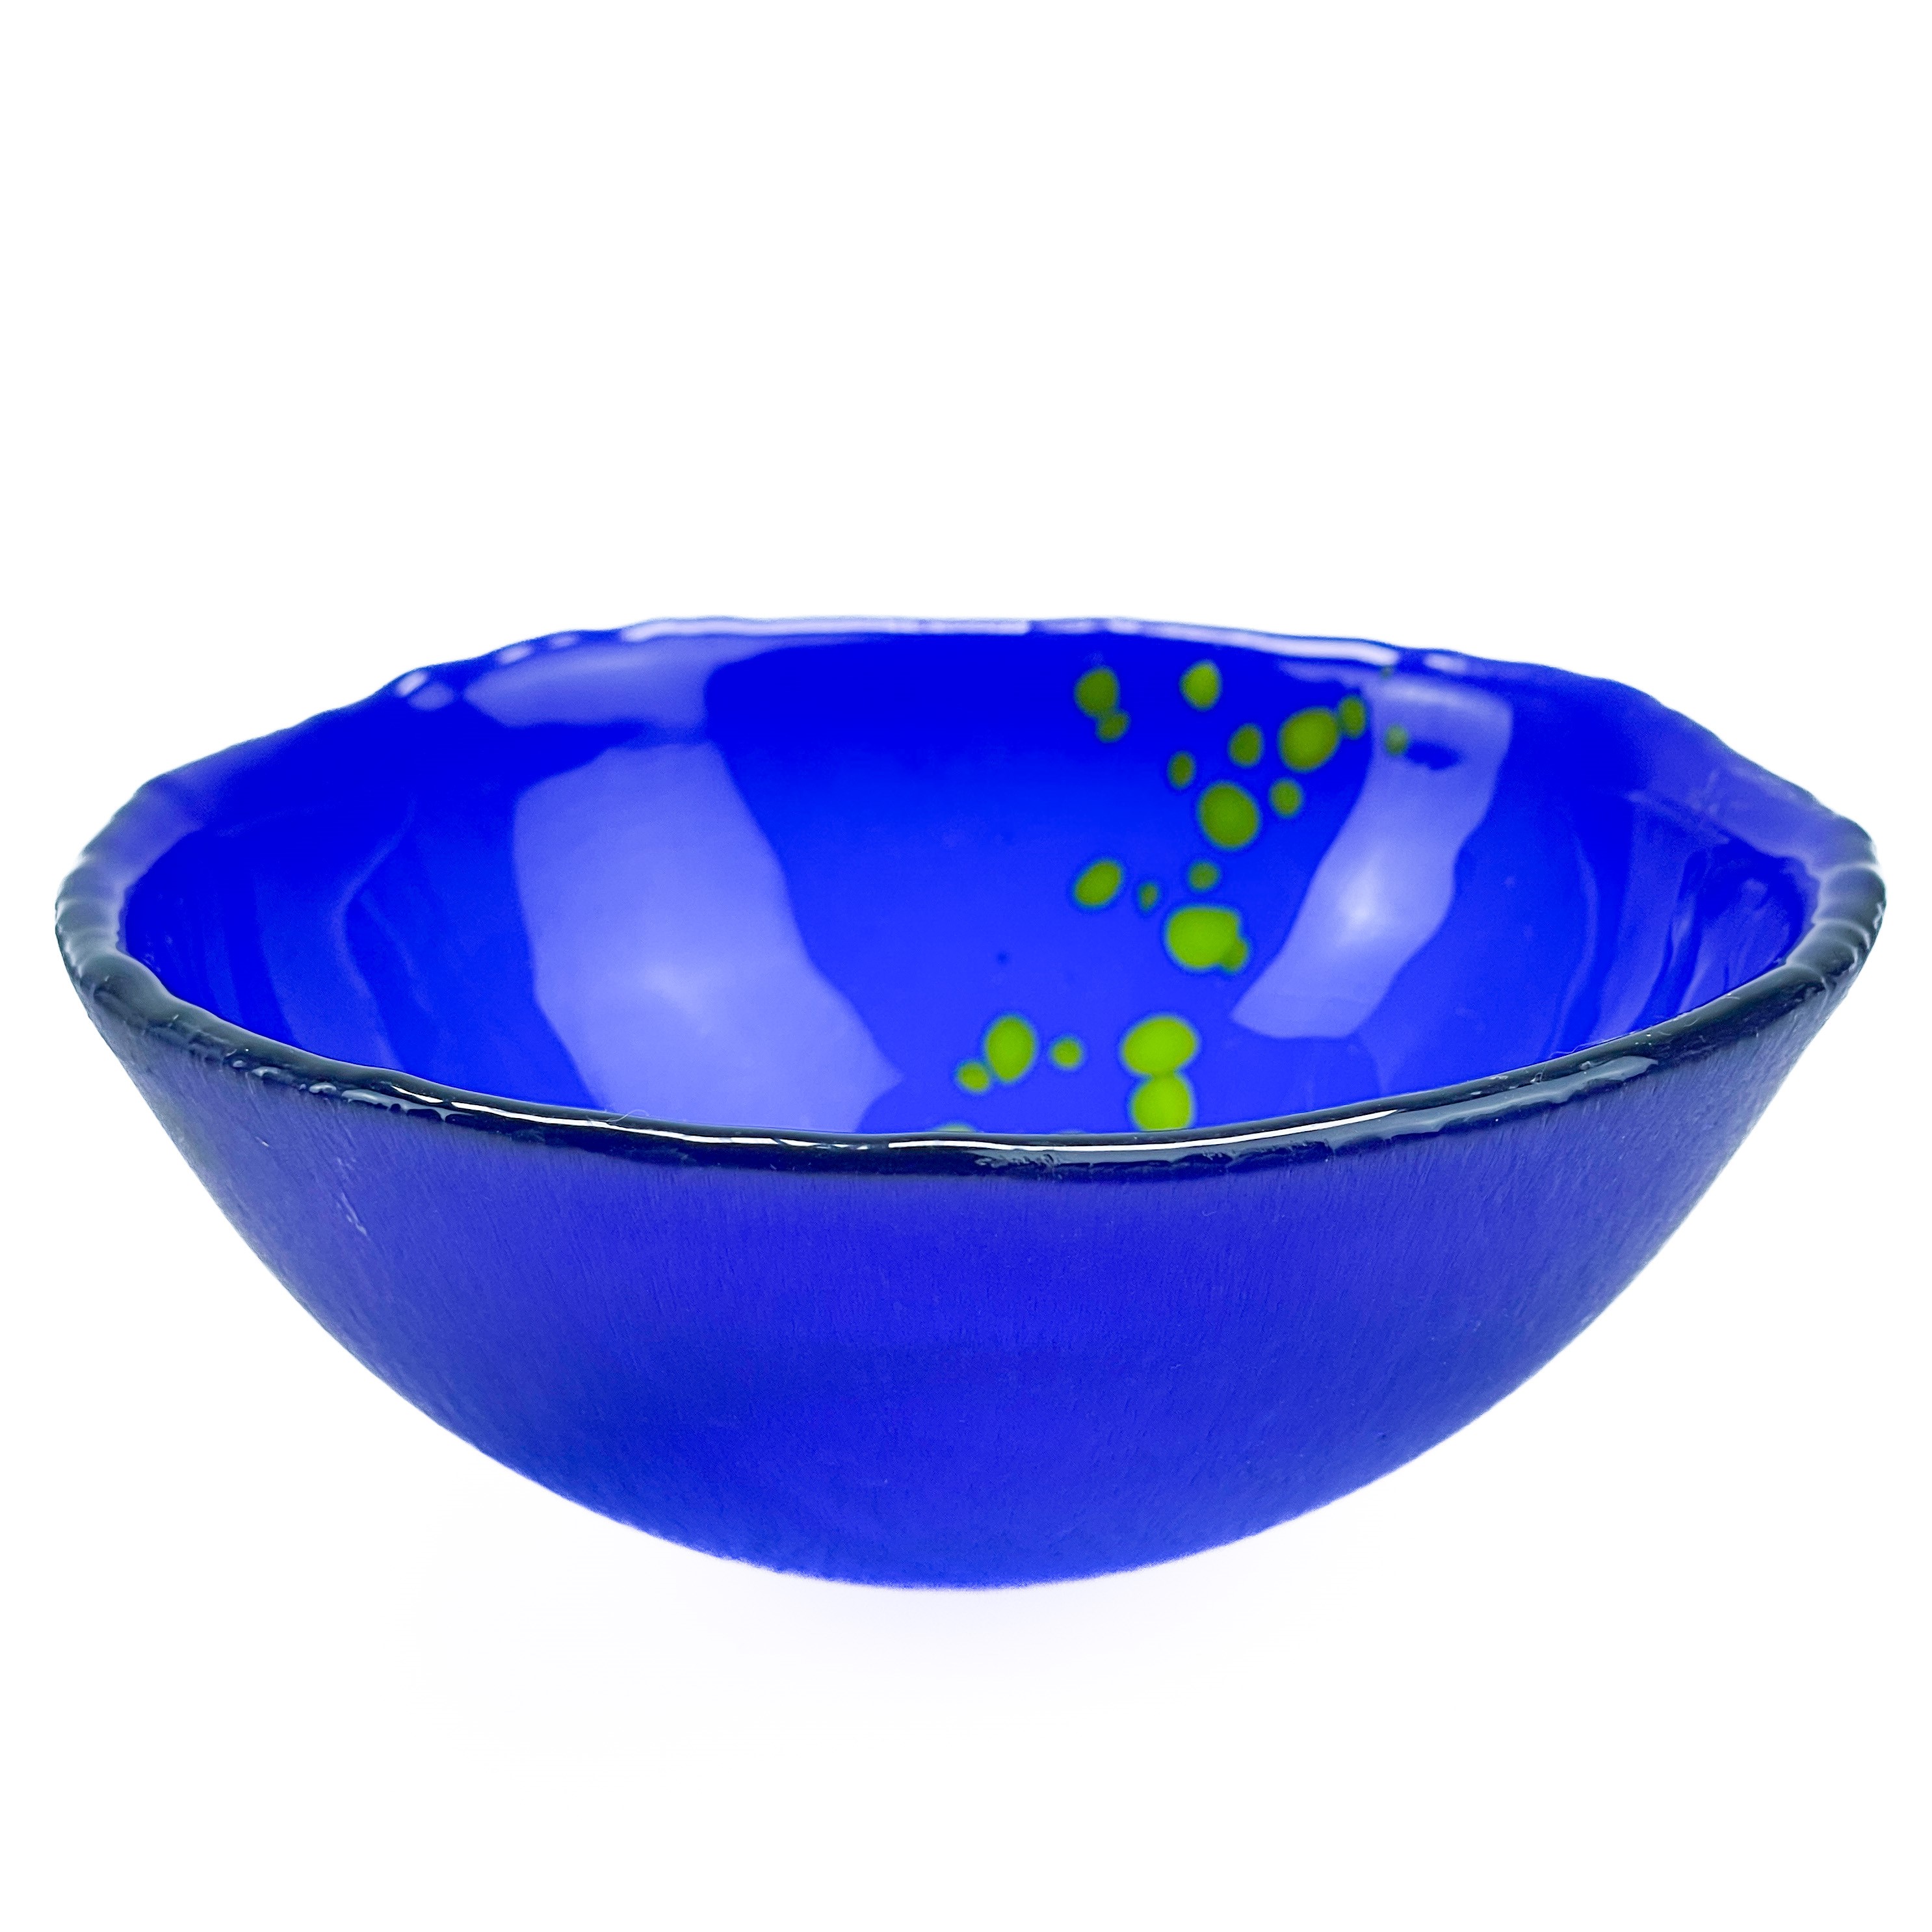 Serena RADCLIFFE Eight Glass Art Bowls - Image 7 of 18